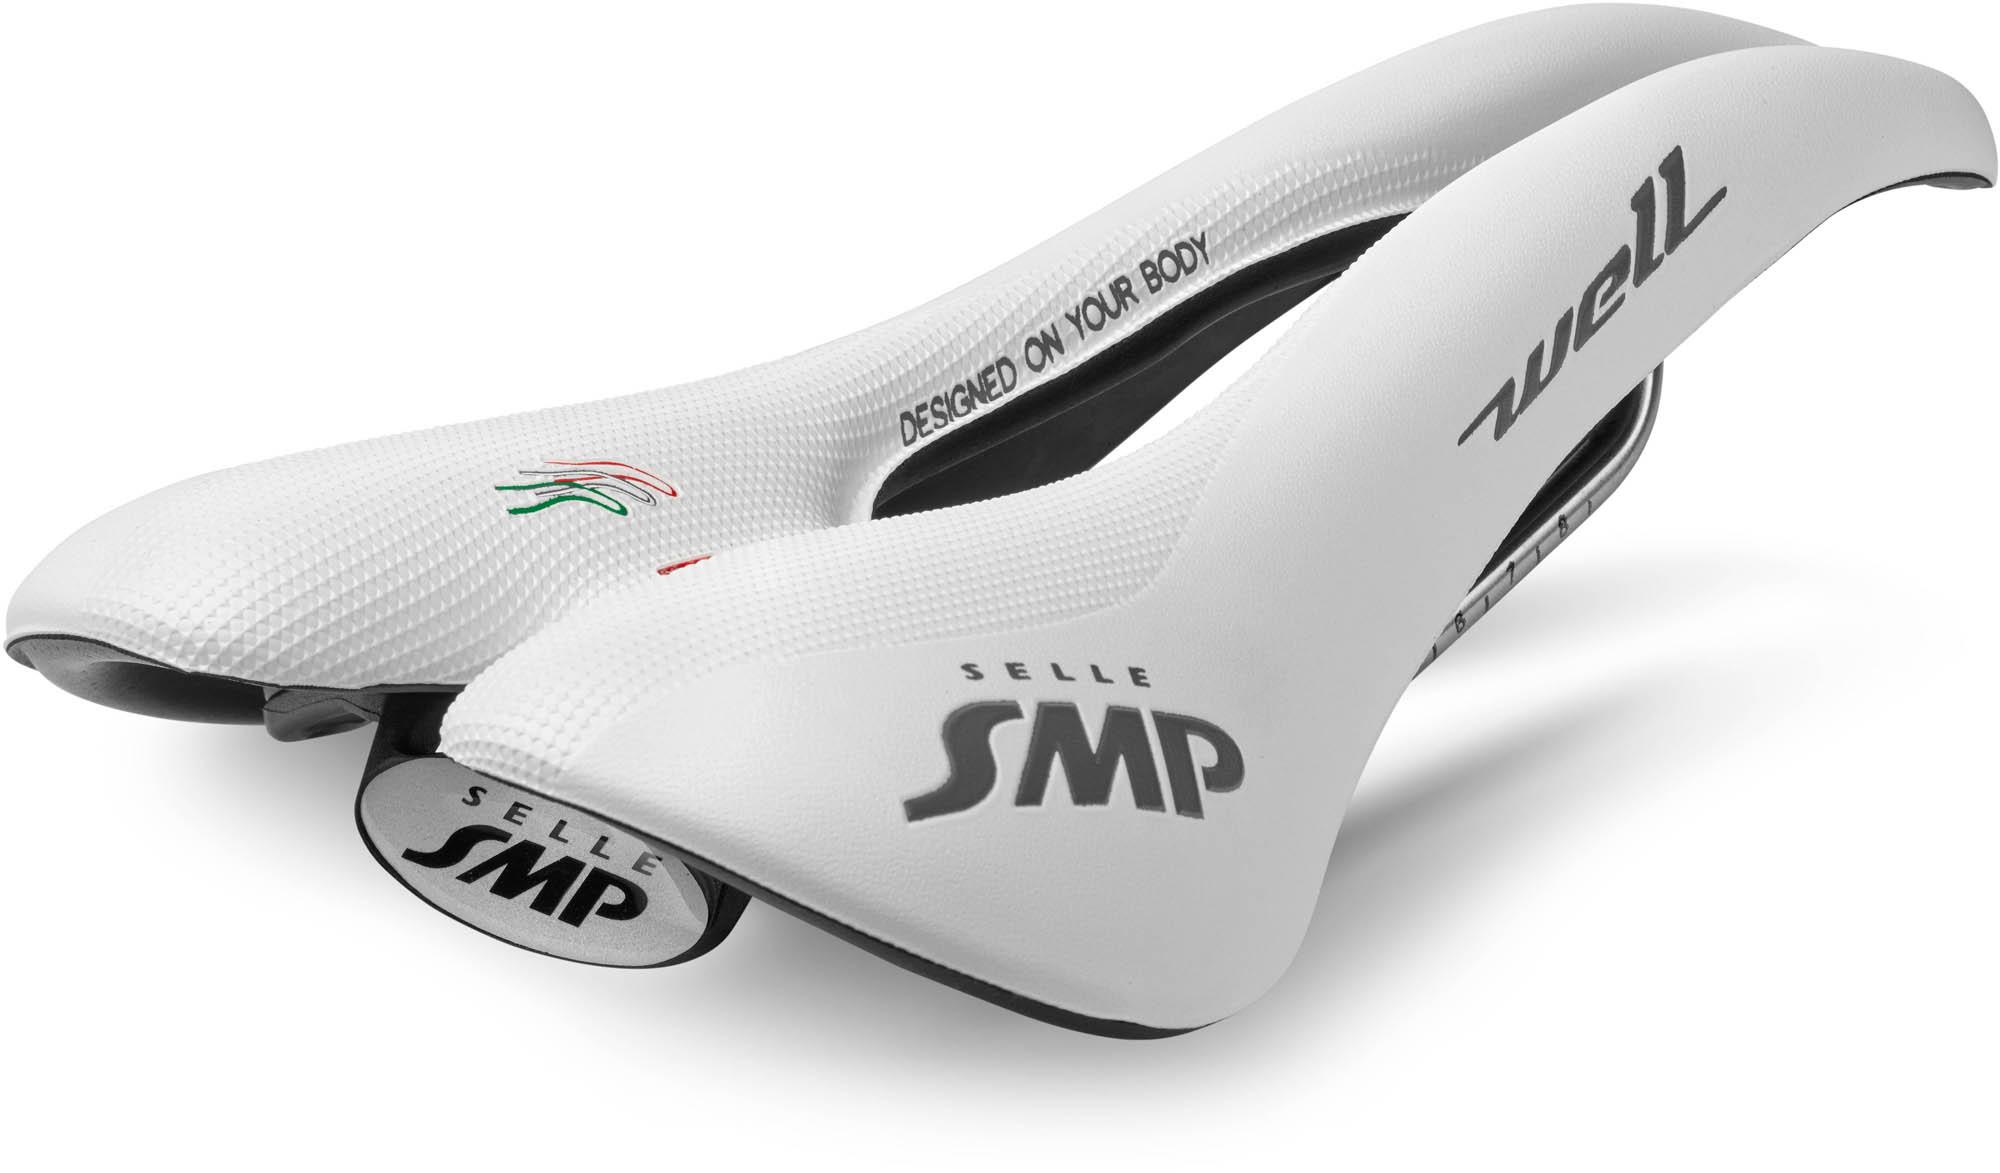 Selle Smp Well Bike Saddle  White